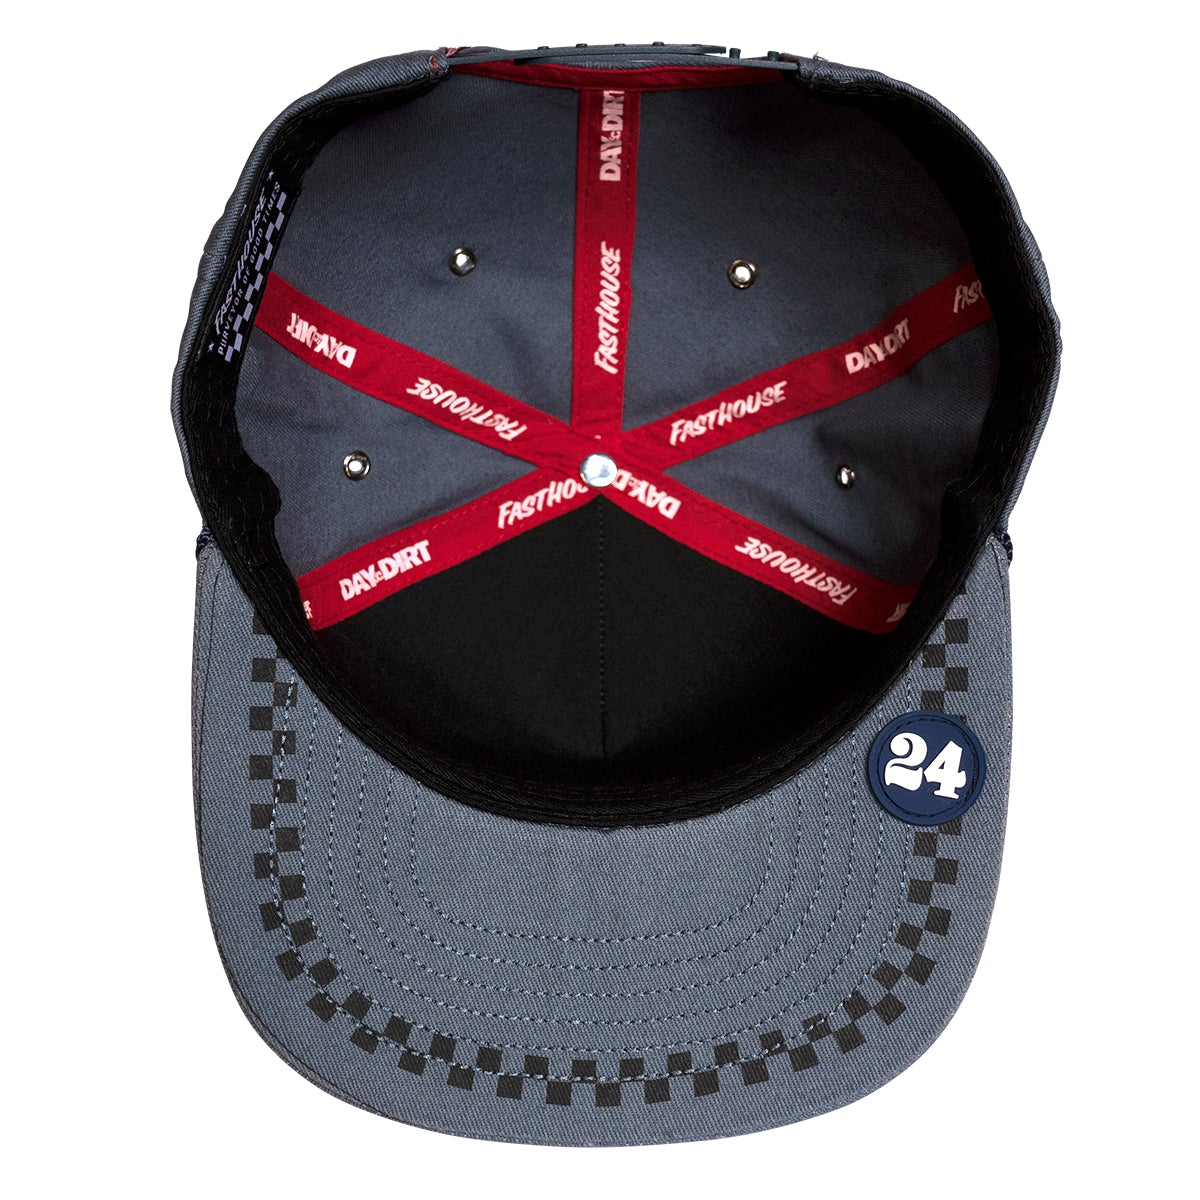 Fasthouse Red Bull Day in the Dirt 24 Hat - ExtremeSupply.com